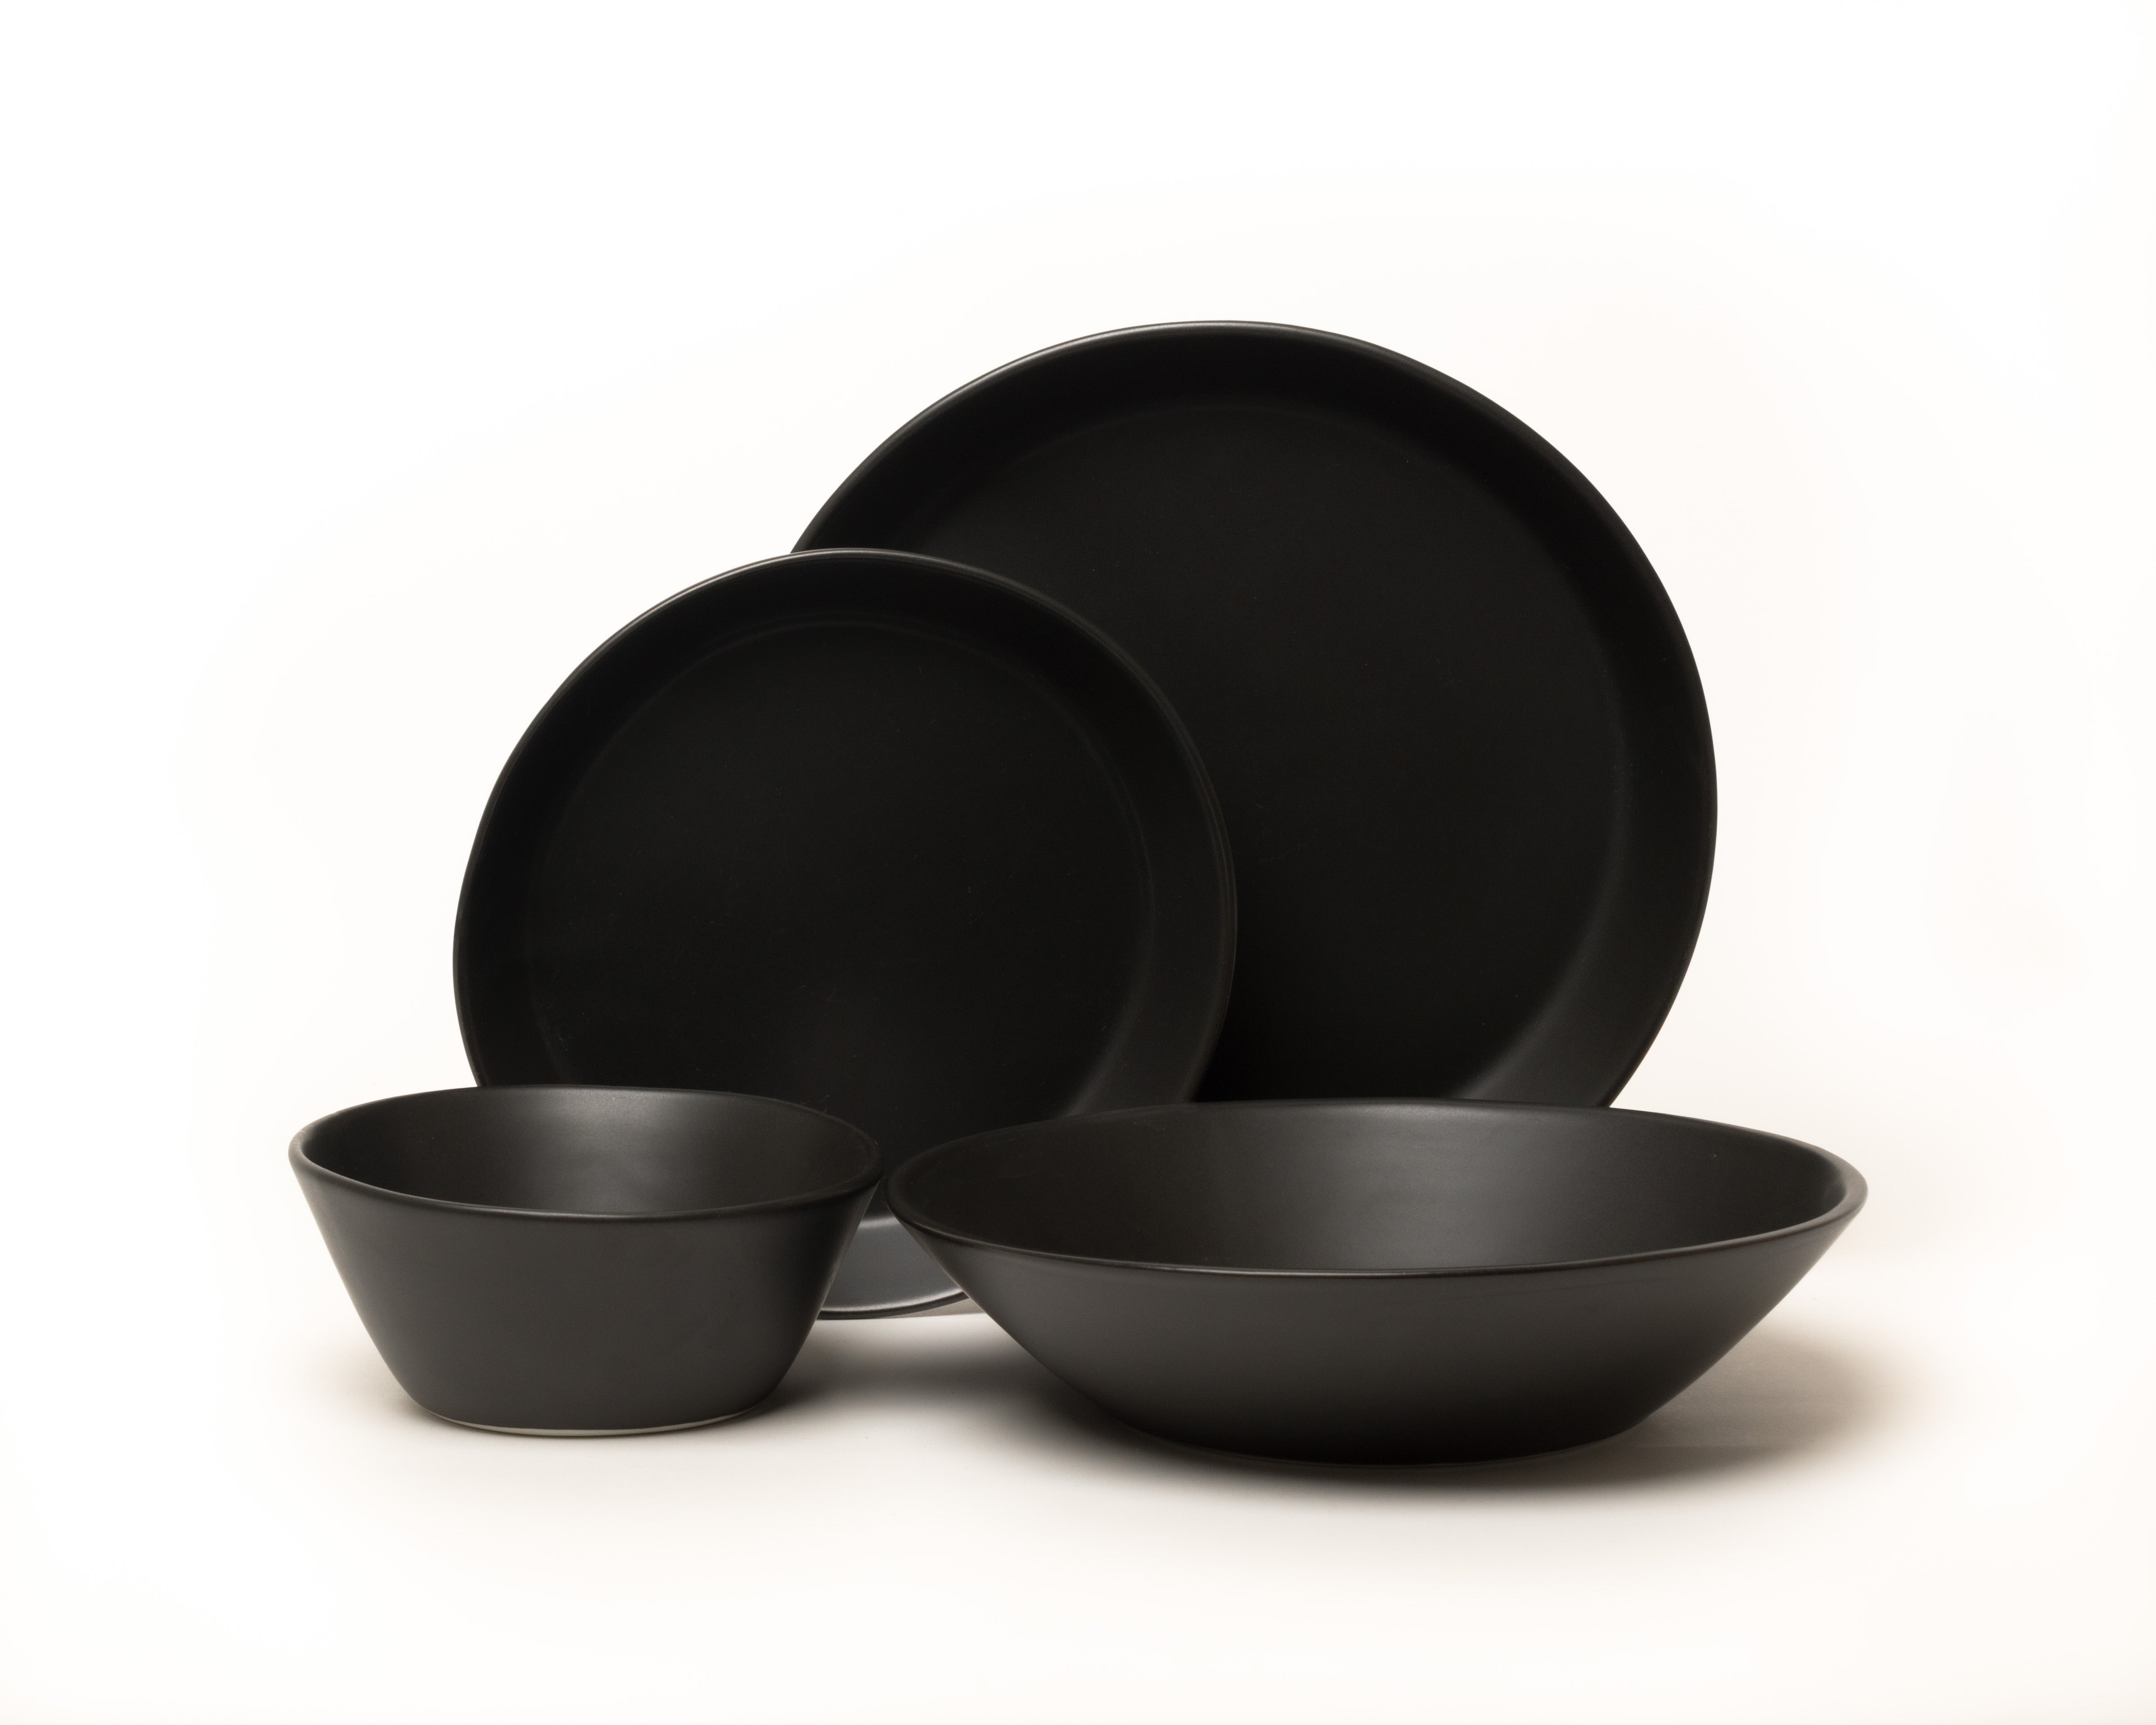 Image of 4 Piece Skali Coupe Dinner Setting